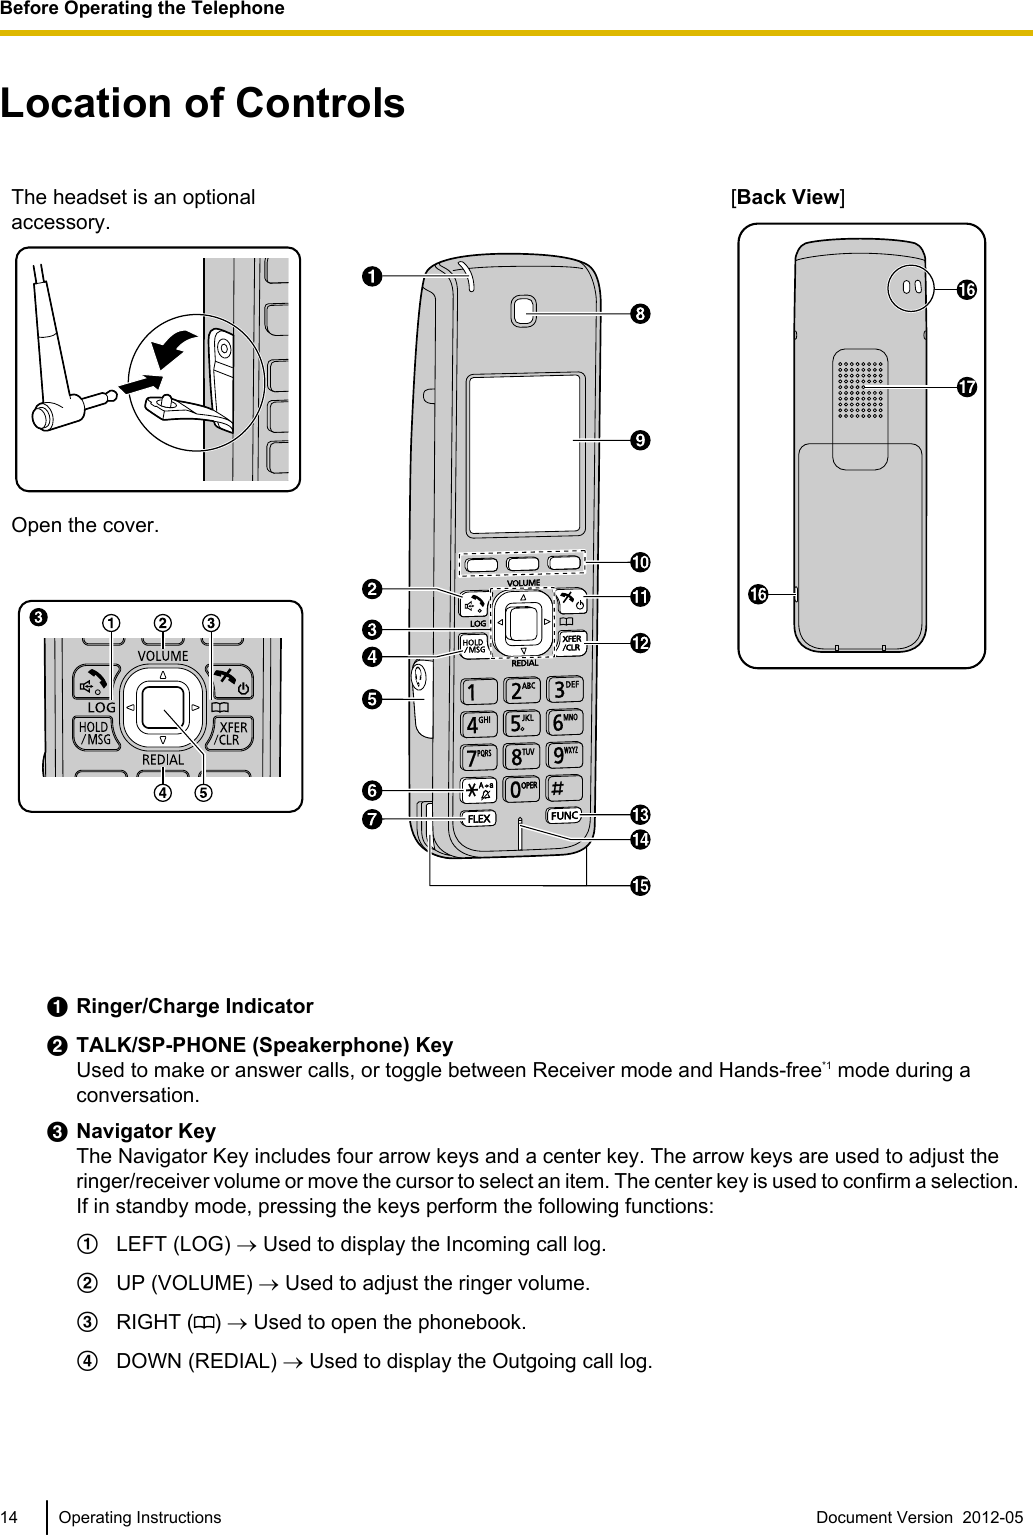 Location of ControlsThe headset is an optionalaccessory.Open the cover.[Back View]ARinger/Charge IndicatorBTALK/SP-PHONE (Speakerphone) KeyUsed to make or answer calls, or toggle between Receiver mode and Hands-free*1 mode during aconversation.CNavigator KeyThe Navigator Key includes four arrow keys and a center key. The arrow keys are used to adjust theringer/receiver volume or move the cursor to select an item. The center key is used to confirm a selection.If in standby mode, pressing the keys perform the following functions:ALEFT (LOG) ® Used to display the Incoming call log.BUP (VOLUME) ® Used to adjust the ringer volume.CRIGHT ( ) ® Used to open the phonebook.DDOWN (REDIAL) ® Used to display the Outgoing call log.14 Operating Instructions Document Version  2012-05  Before Operating the Telephone